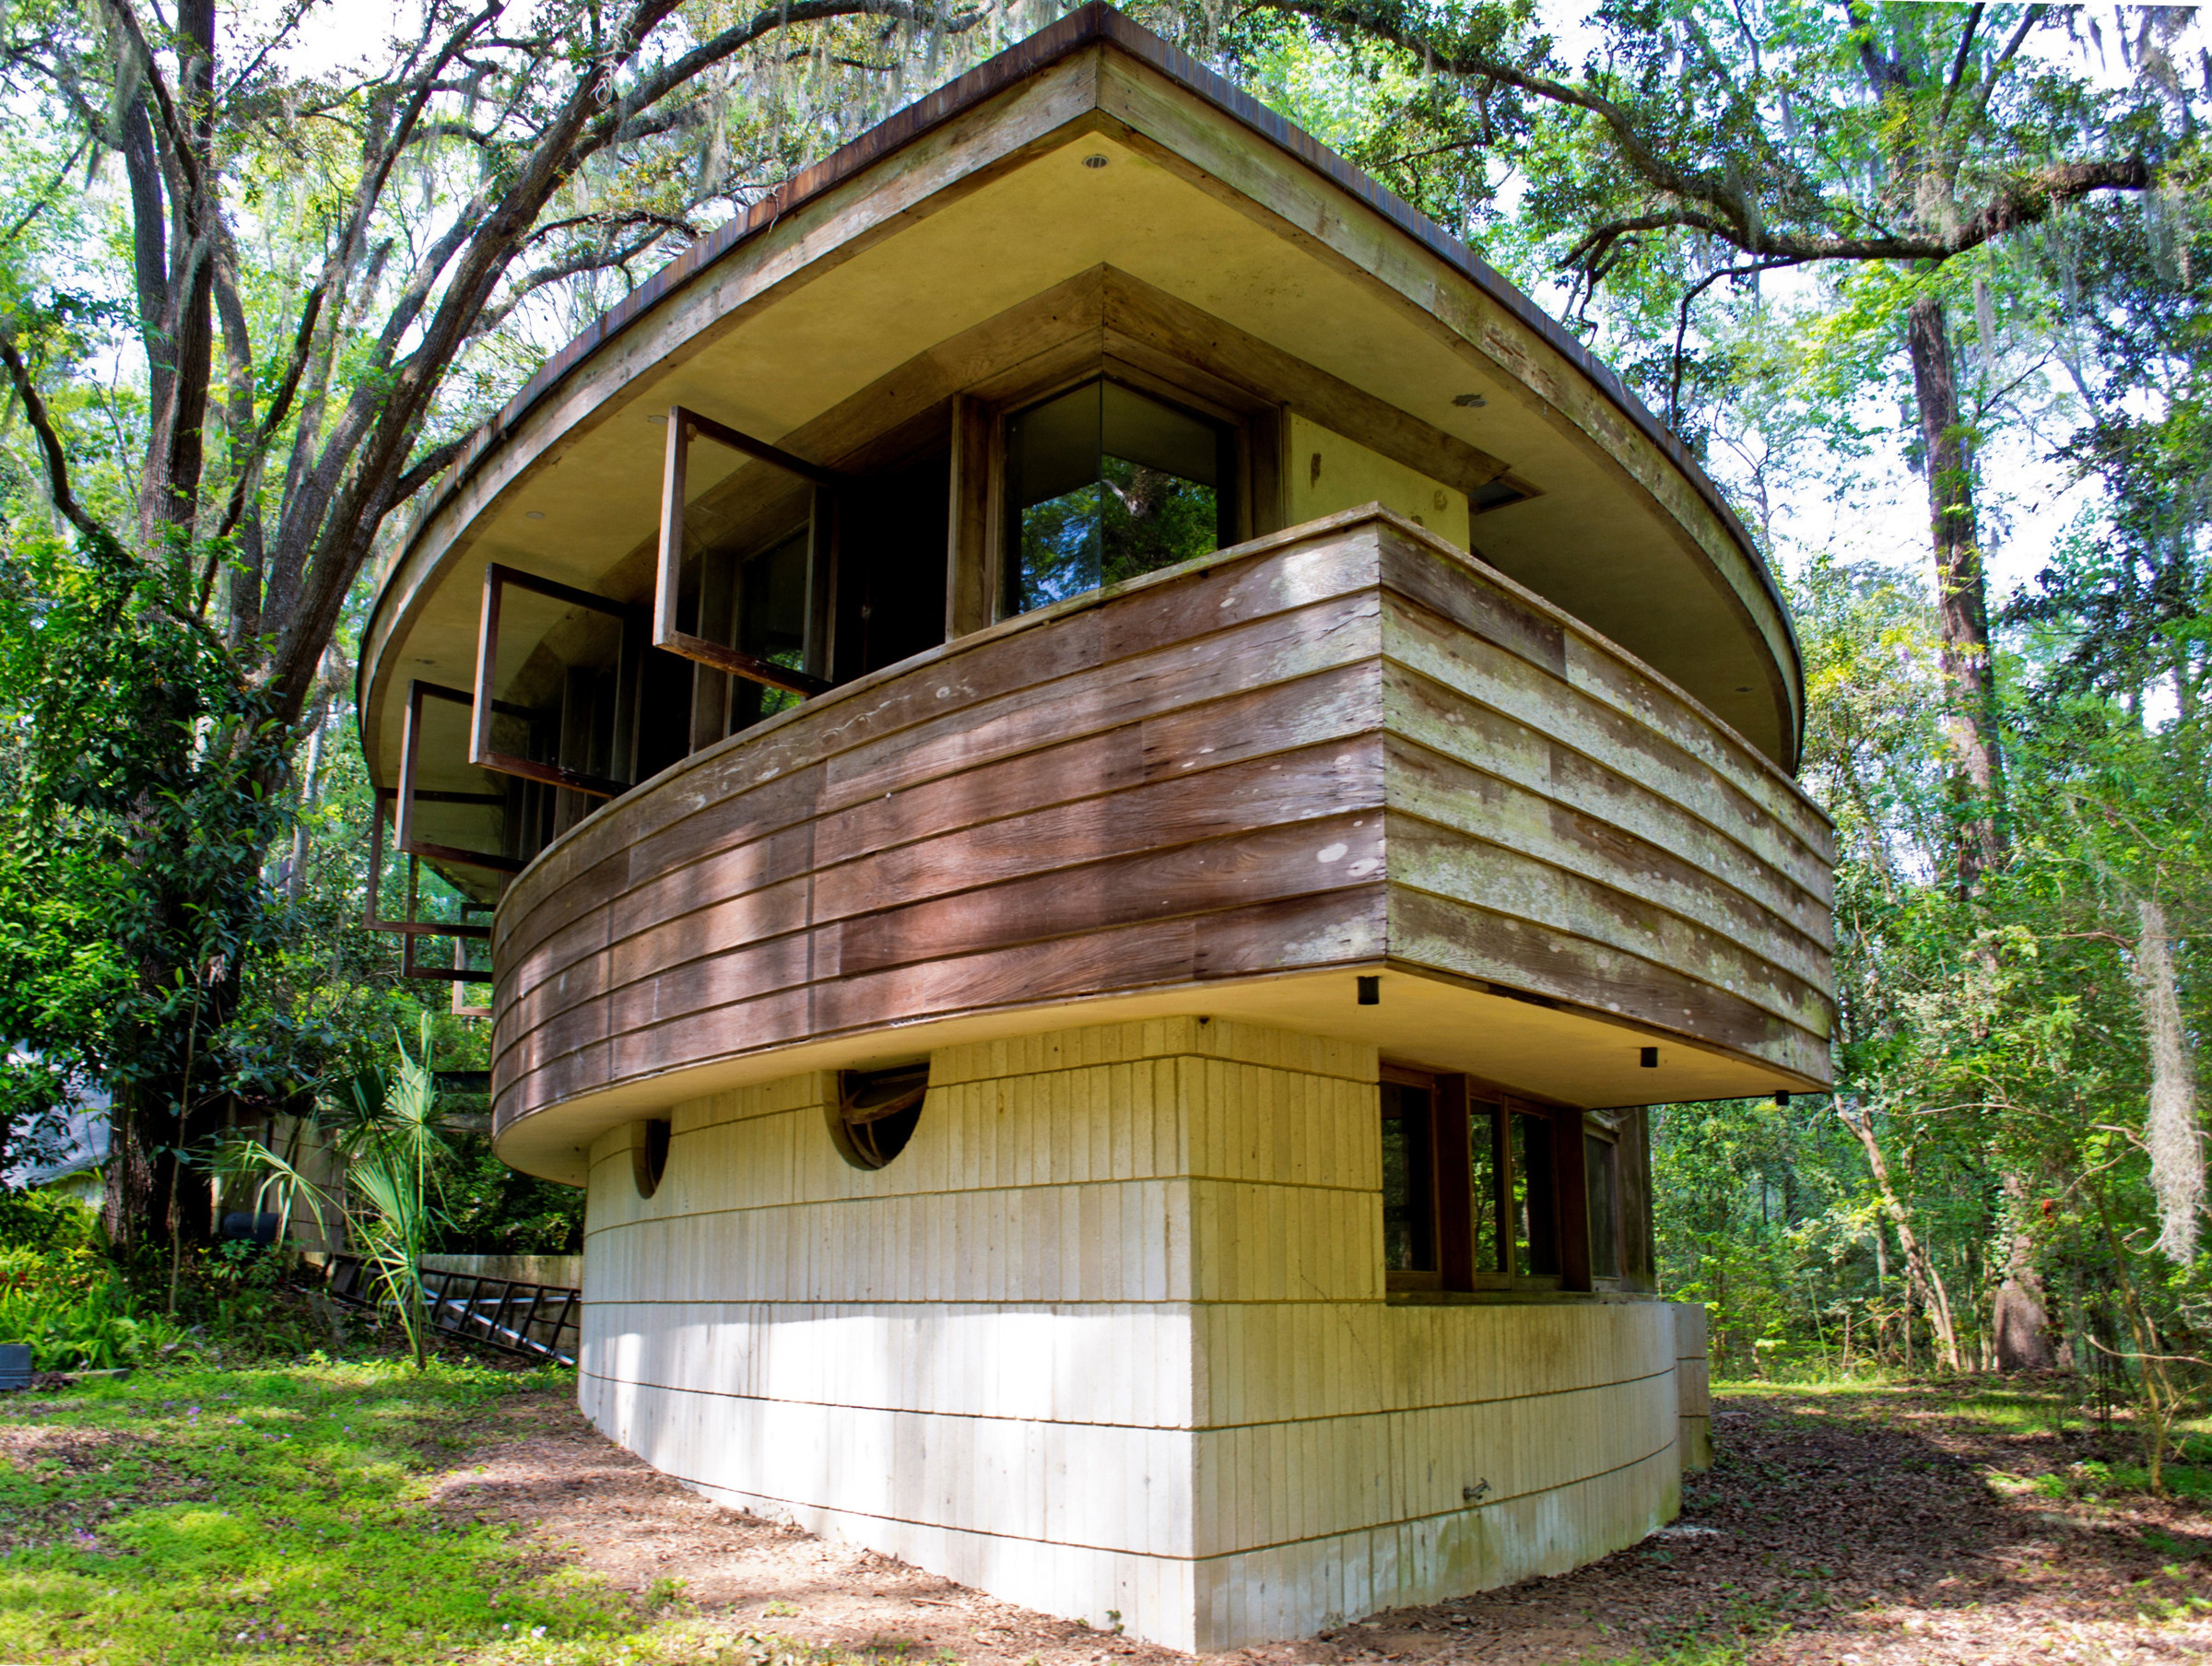 Frank Lloyd Wright's Spring House in Tallahassee, Fla. (Alan C. Spector)